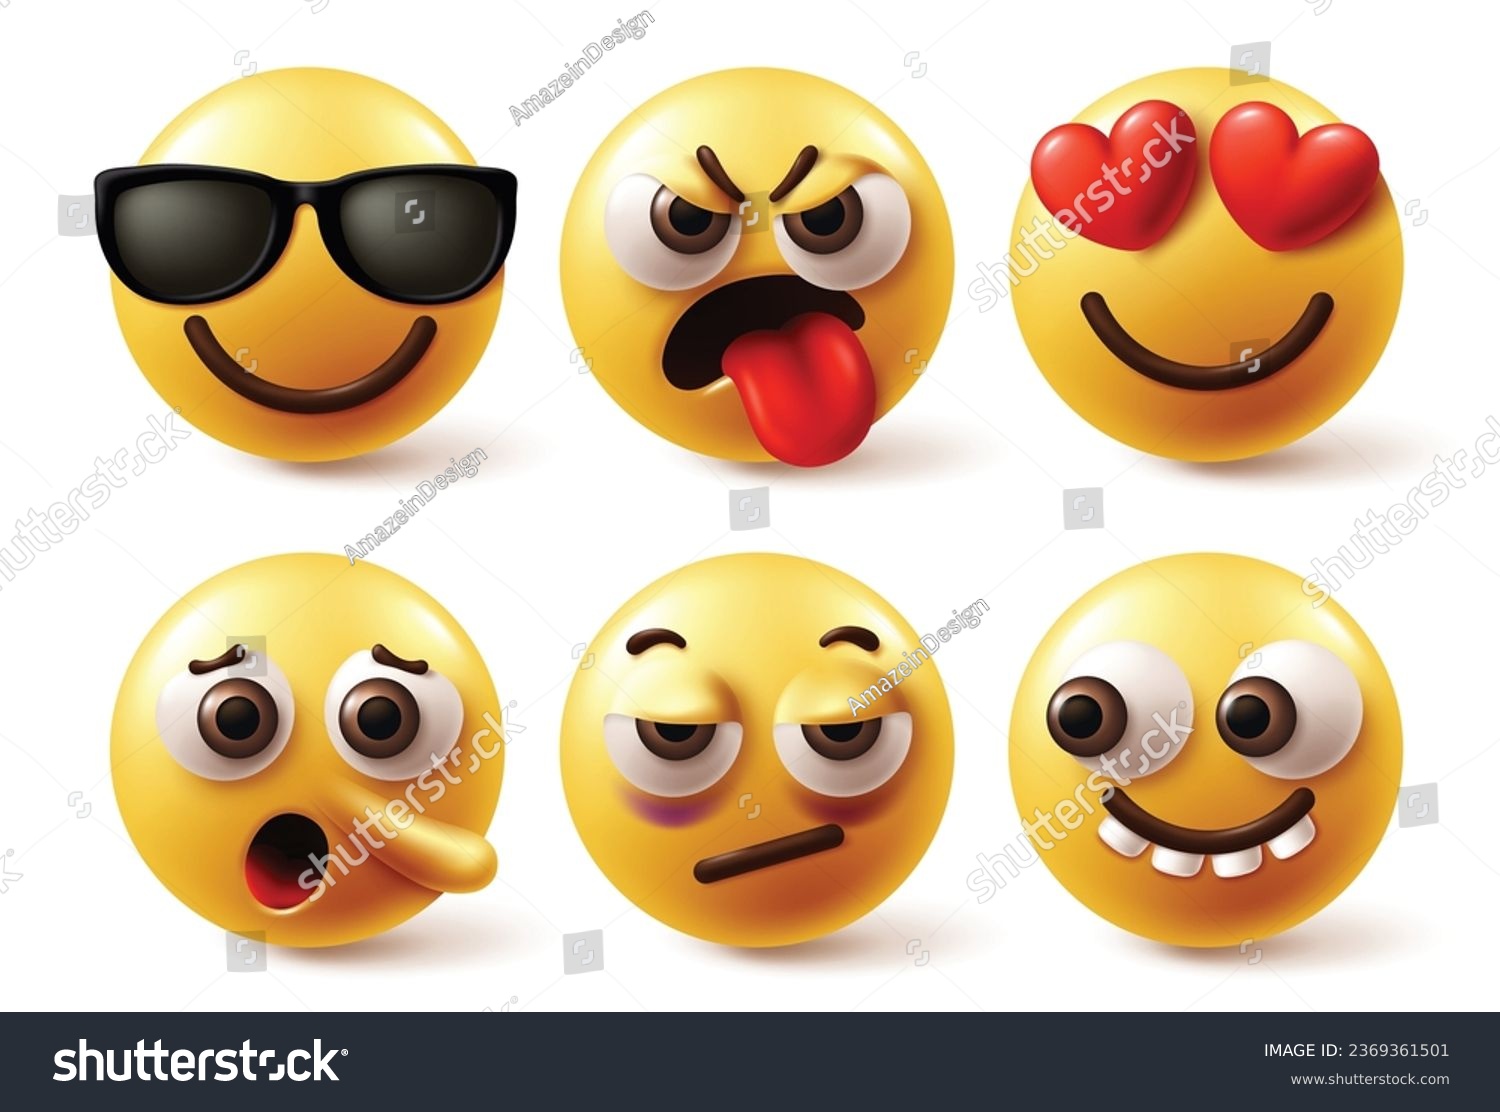 SVG of Emoji face vector set design. Emoticons emojis characters in happy, angry, naughty, in love and pinocchio nose facial expression in white background. Vector illustration yellow icon emoticon  svg